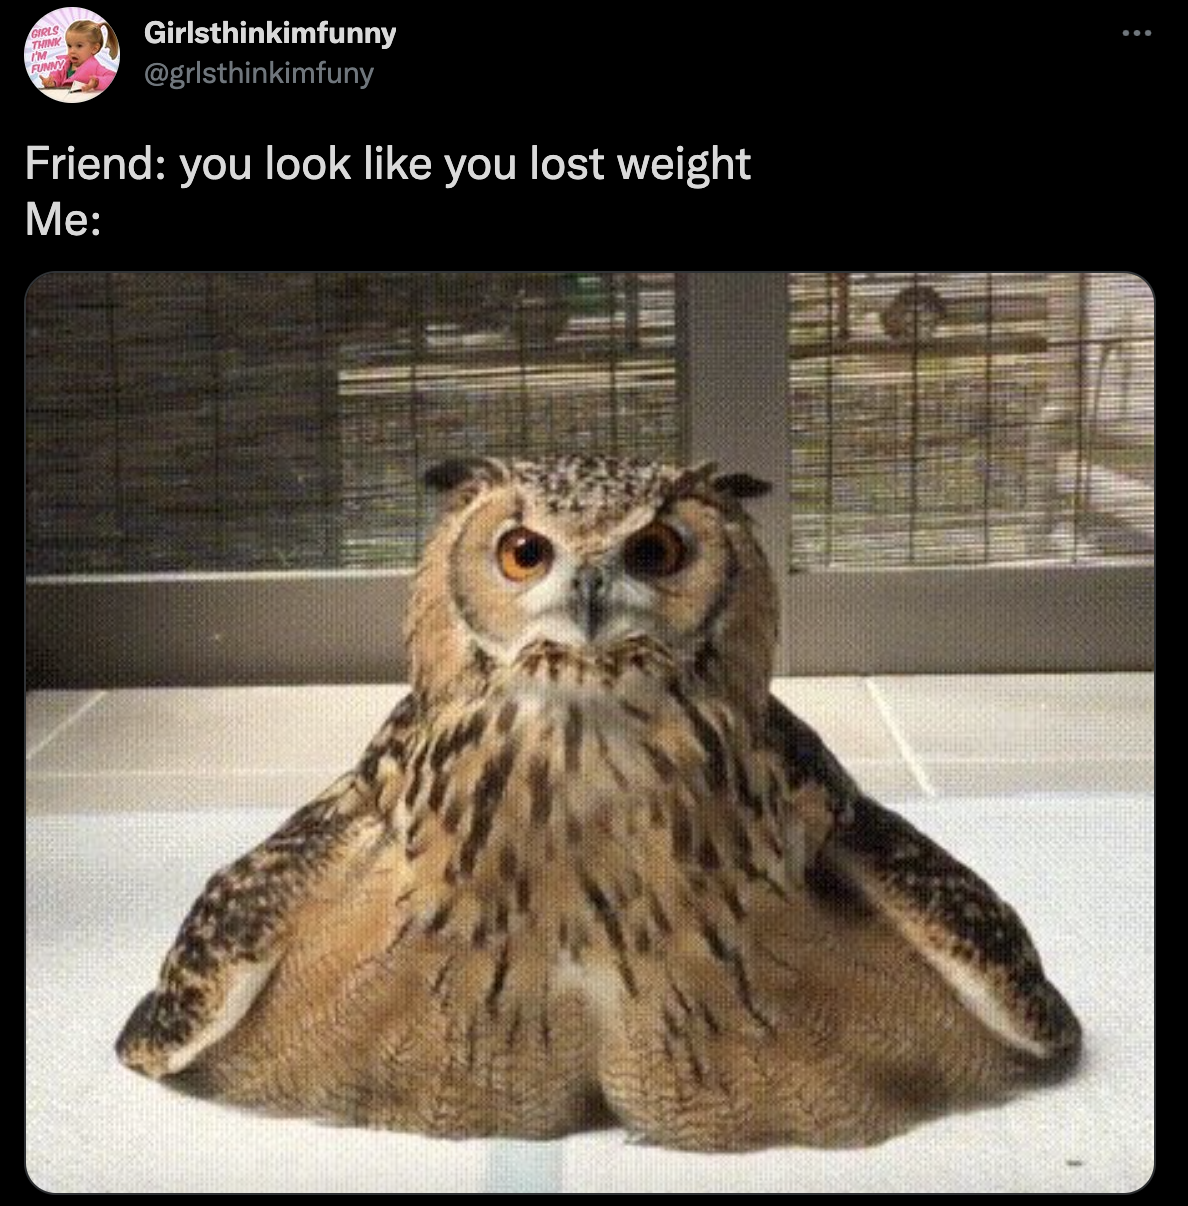 melting owl gif - Girlsthinkimfunny Friend you look you lost weight Me